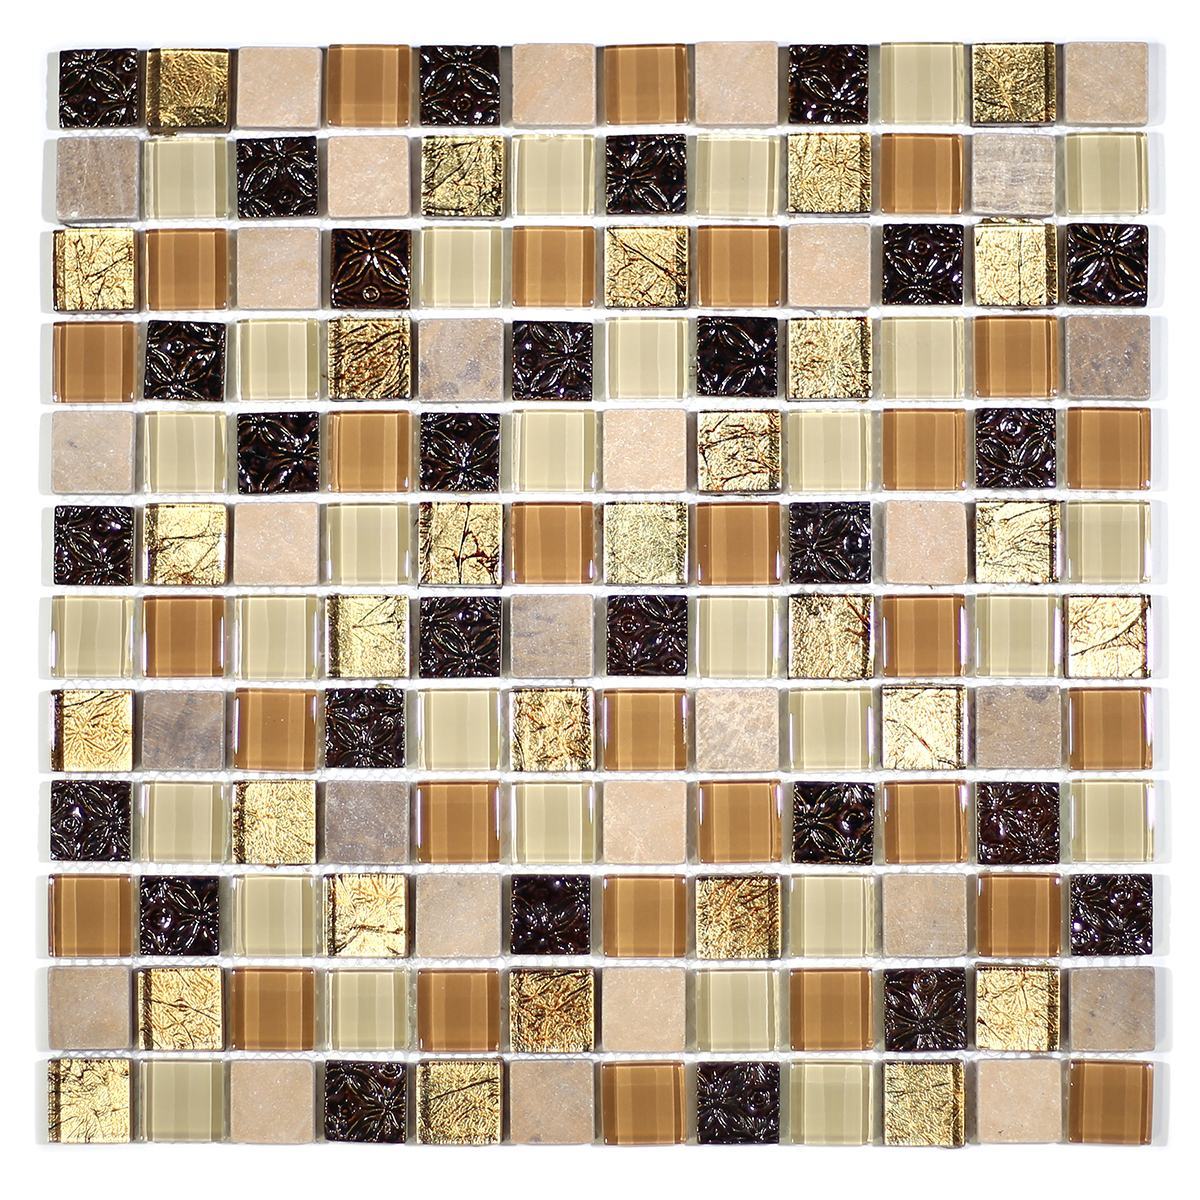 MA40-LS  1" SQUARE GLASS AND RESIN DECORATIVE PIECES MIX